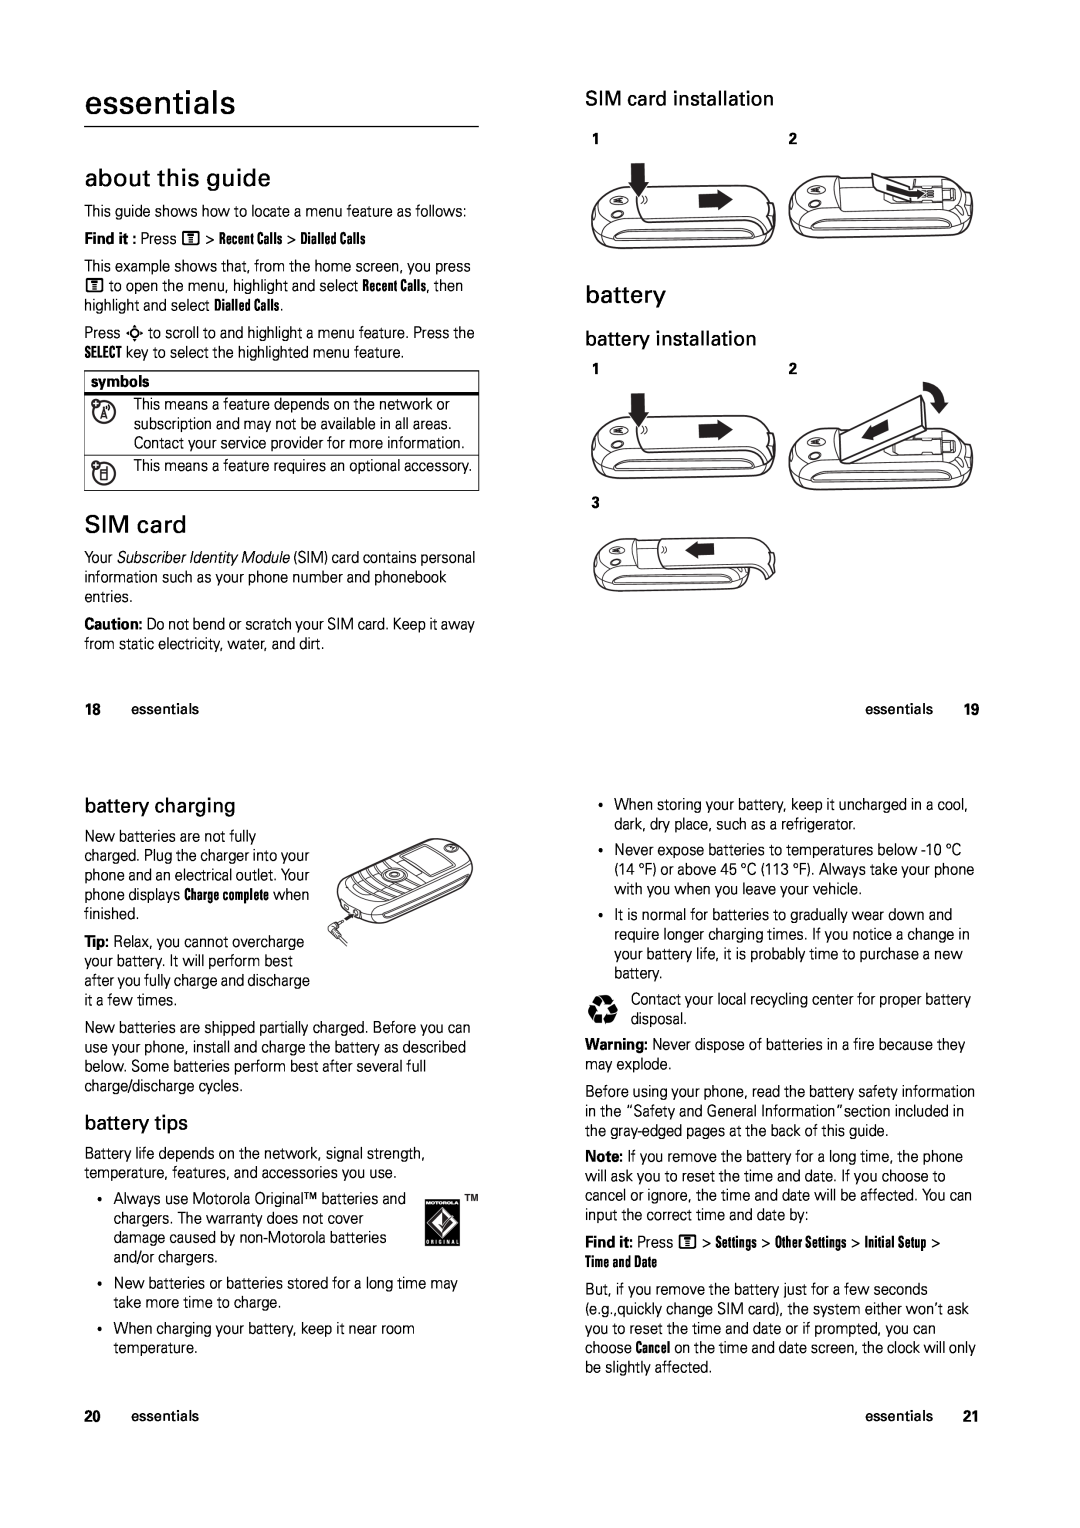 Motorola C139 manual essentials, about this guide, battery charging, battery tips, SIM card installation 